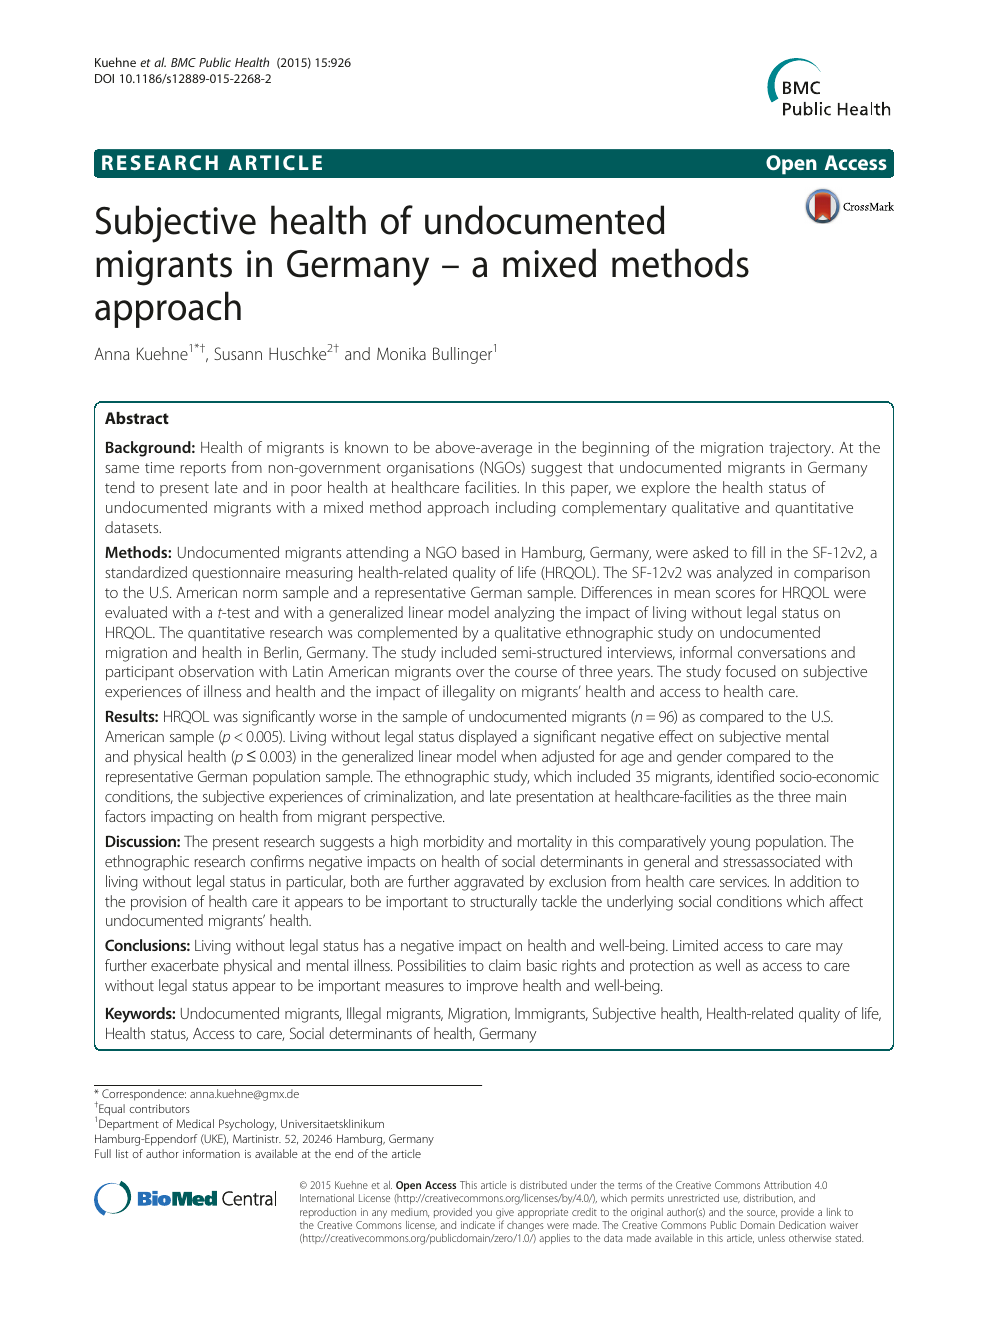 Subjective Health Of Undocumented Migrants In Germany A Mixed Methods Approach Topic Of Research Paper In Health Sciences Download Scholarly Article Pdf And Read For Free On Cyberleninka Open Science Hub